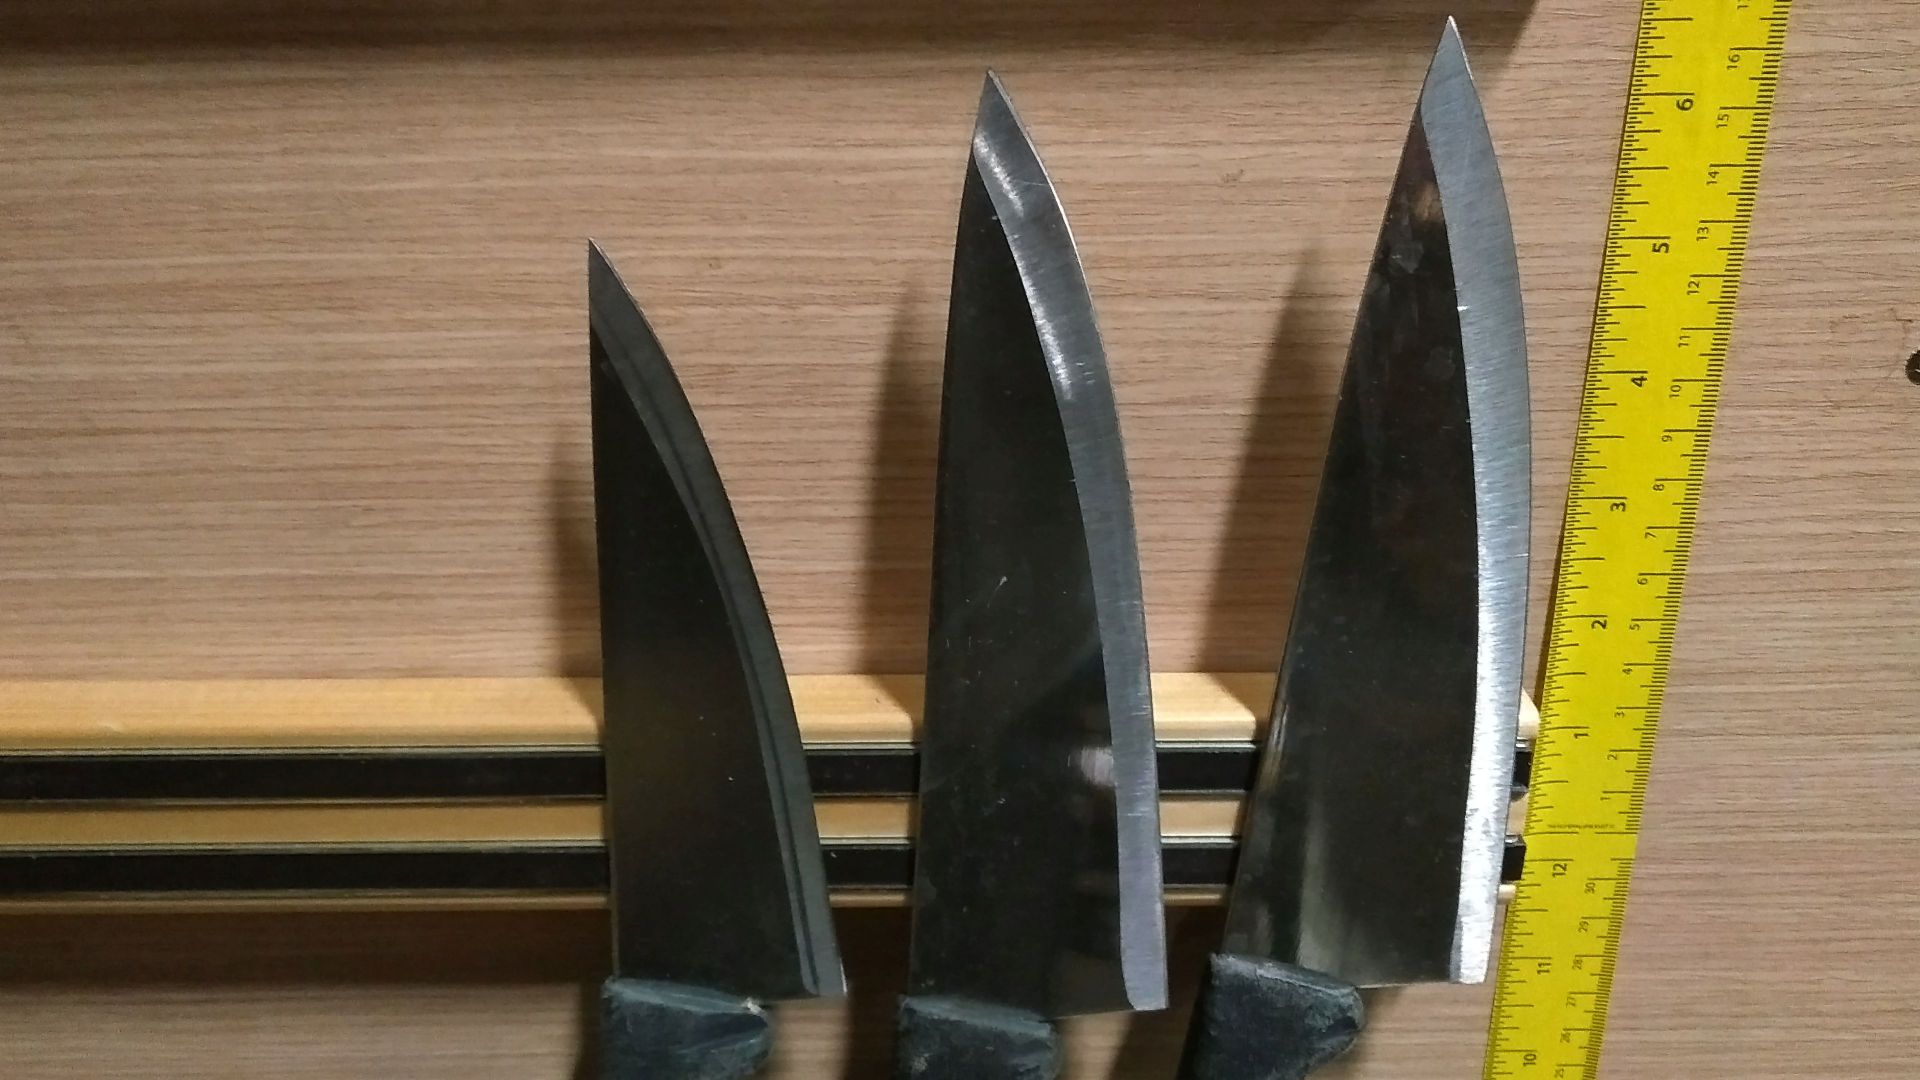 Black Used/Sharpened Knives - Lot of 3 - Image 2 of 2